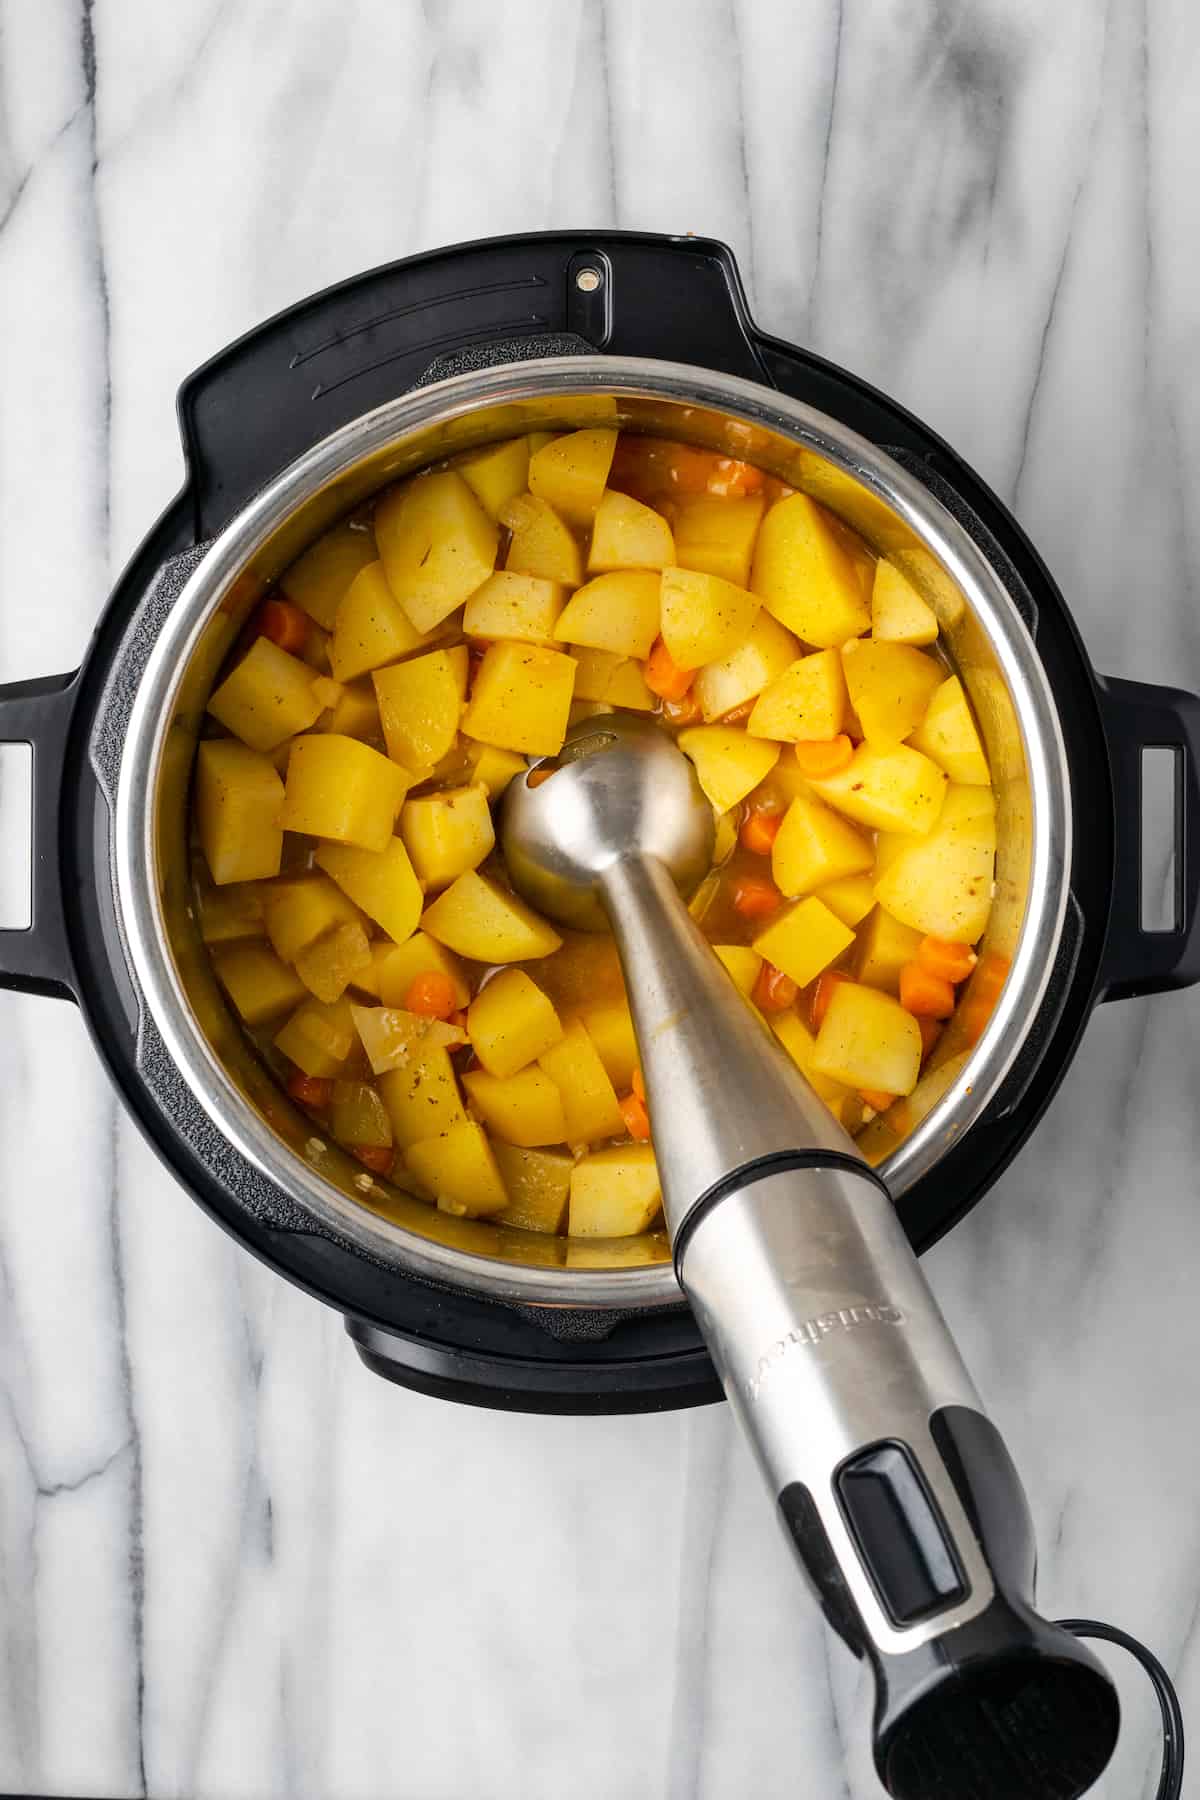 An immersion blender in an Instant Pot with cooked potatoes, carrots, onions, and veggie broth